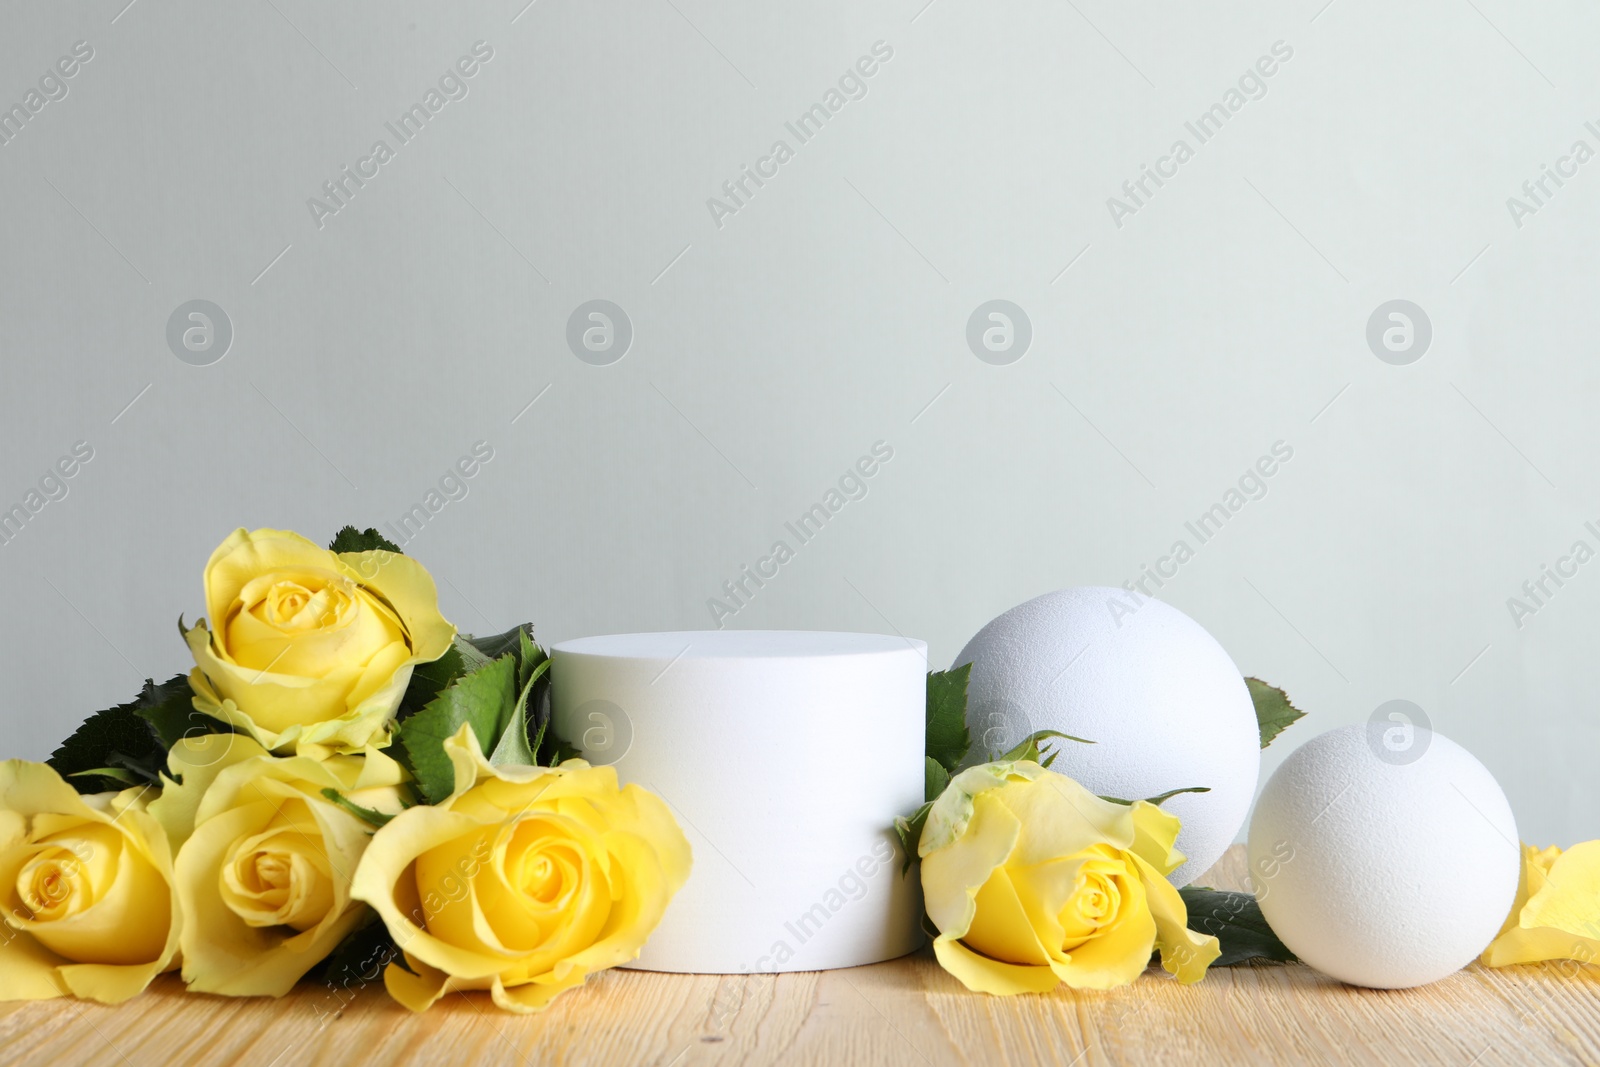 Photo of Beautiful presentation for product. White geometric figures and yellow roses on wooden table against light grey background, space for text